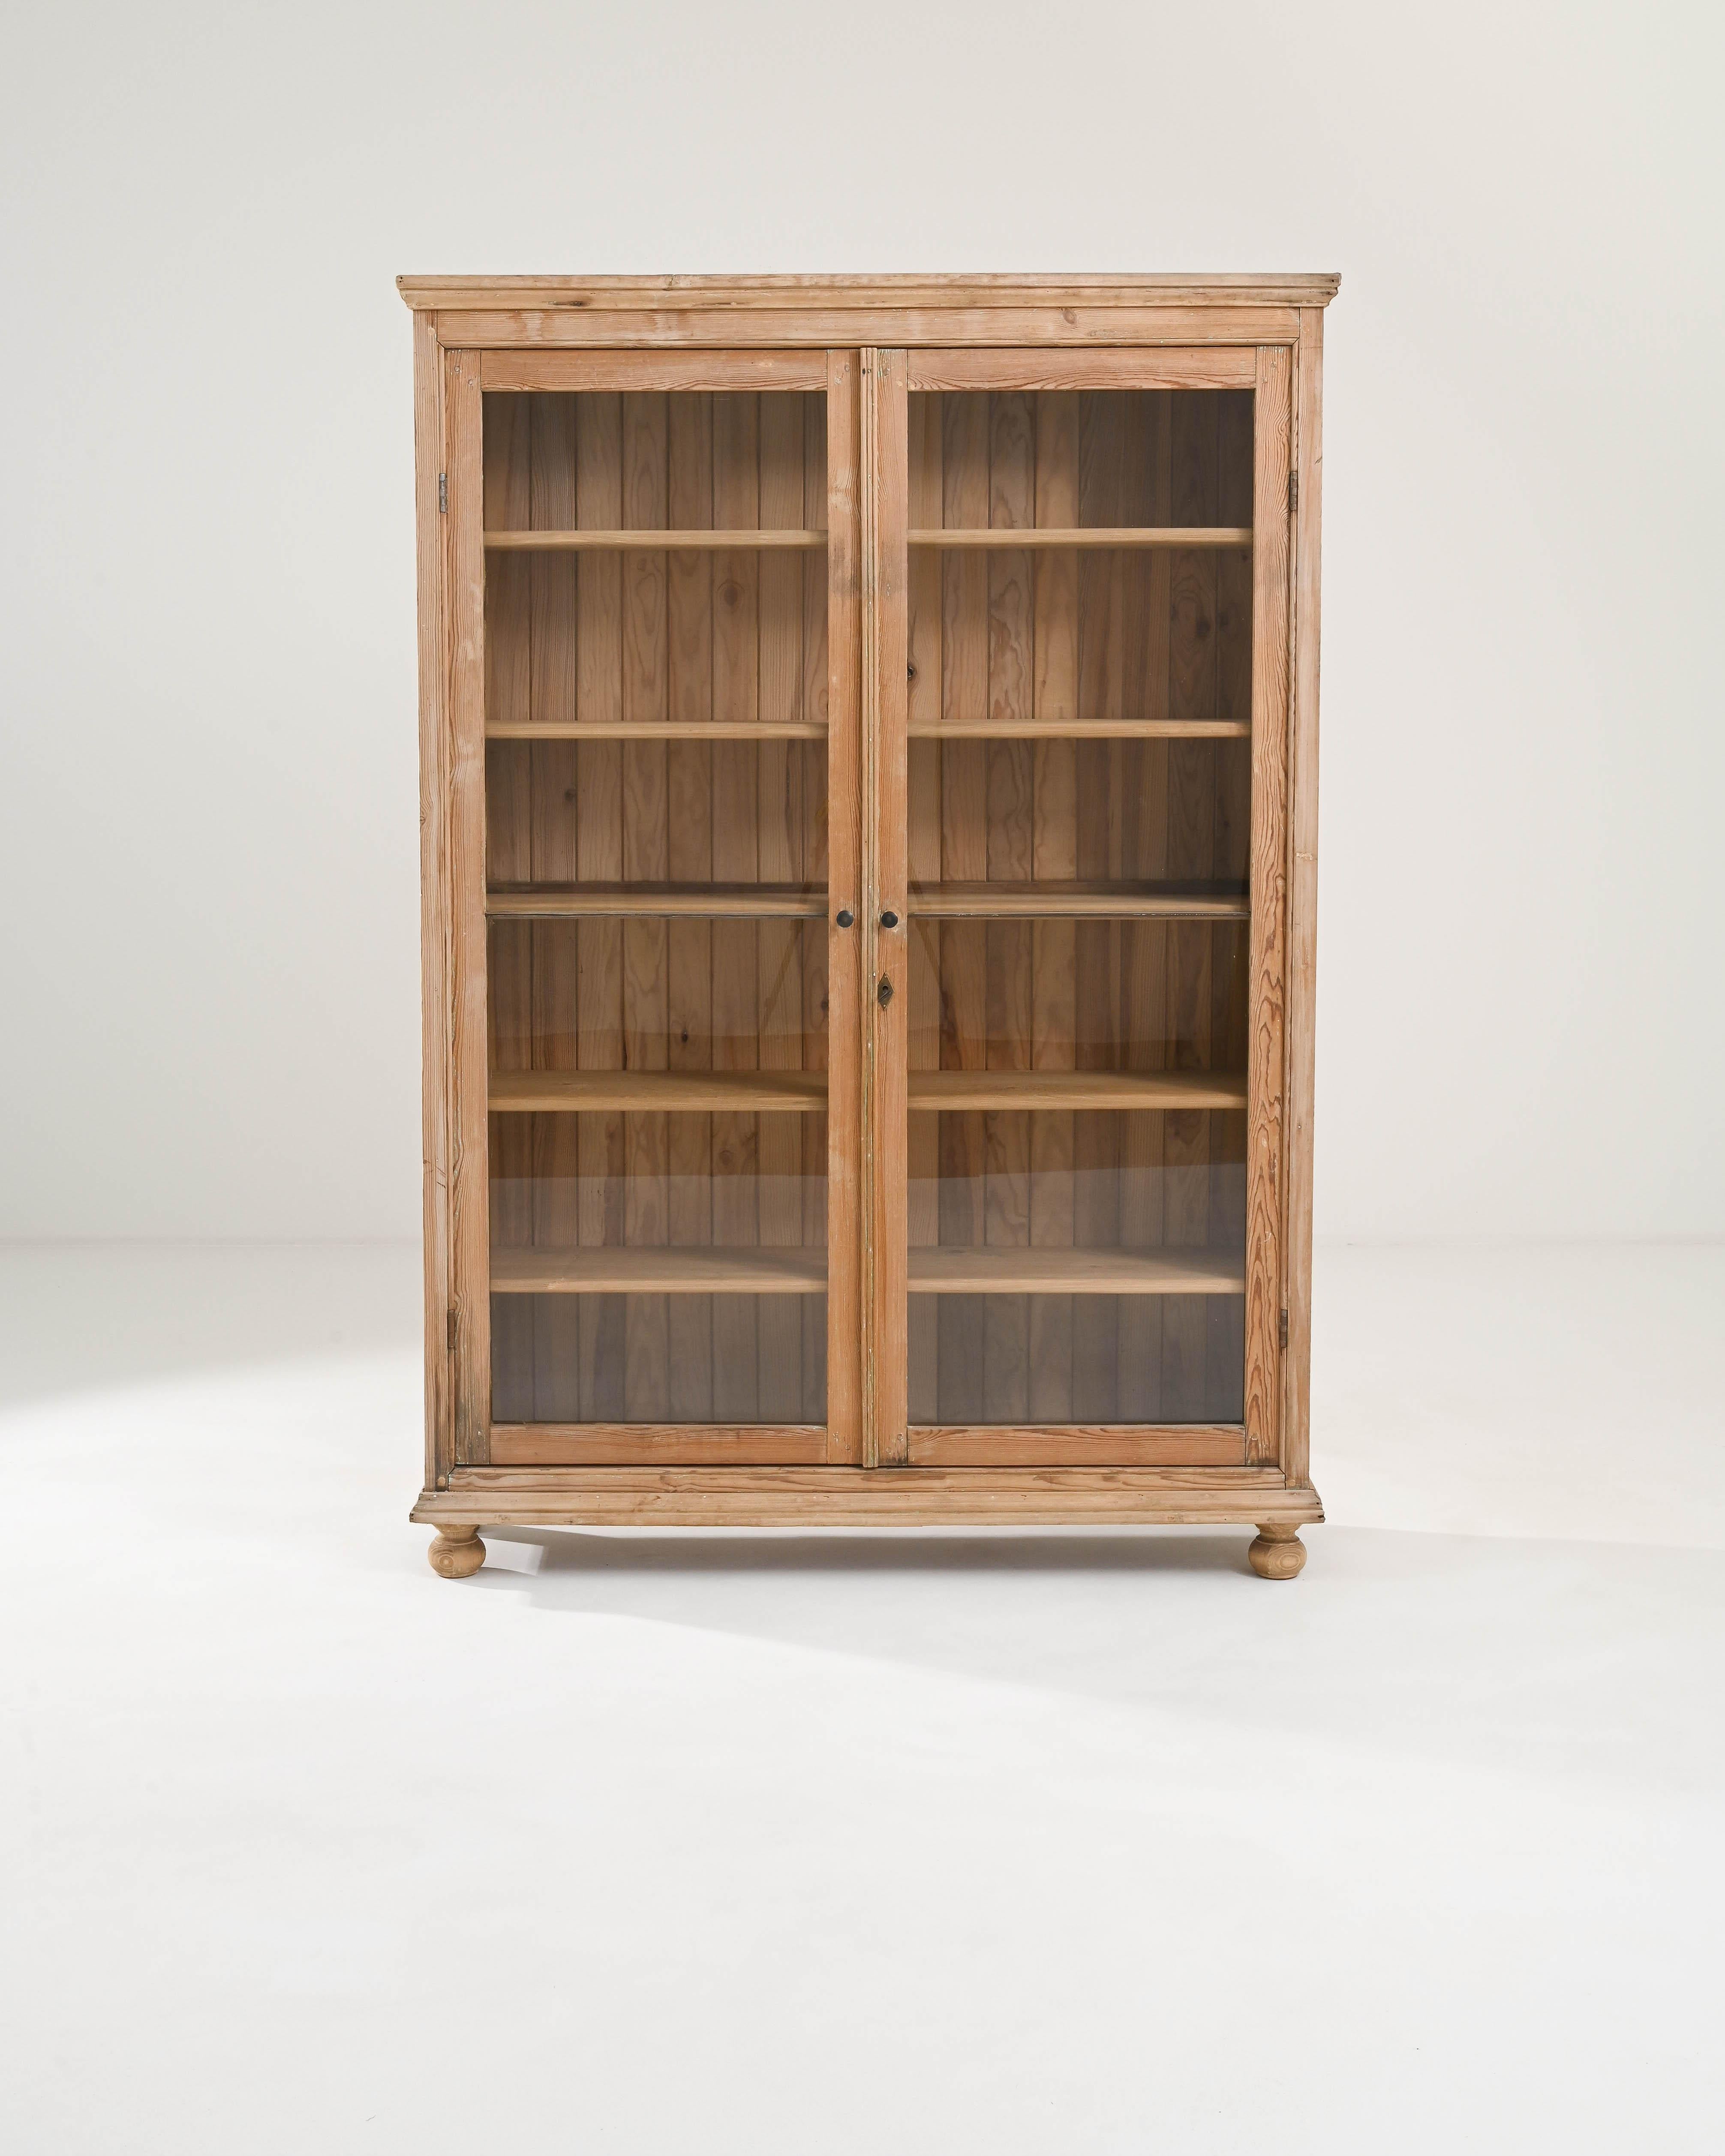 A wooden vitrine from France circa 1900. Rustic and brimming with simple geometric grace, this glass and wooden display case offers a cheery addition to any space. Two glass paned doors swing outwards to allow access to a spacious case with six